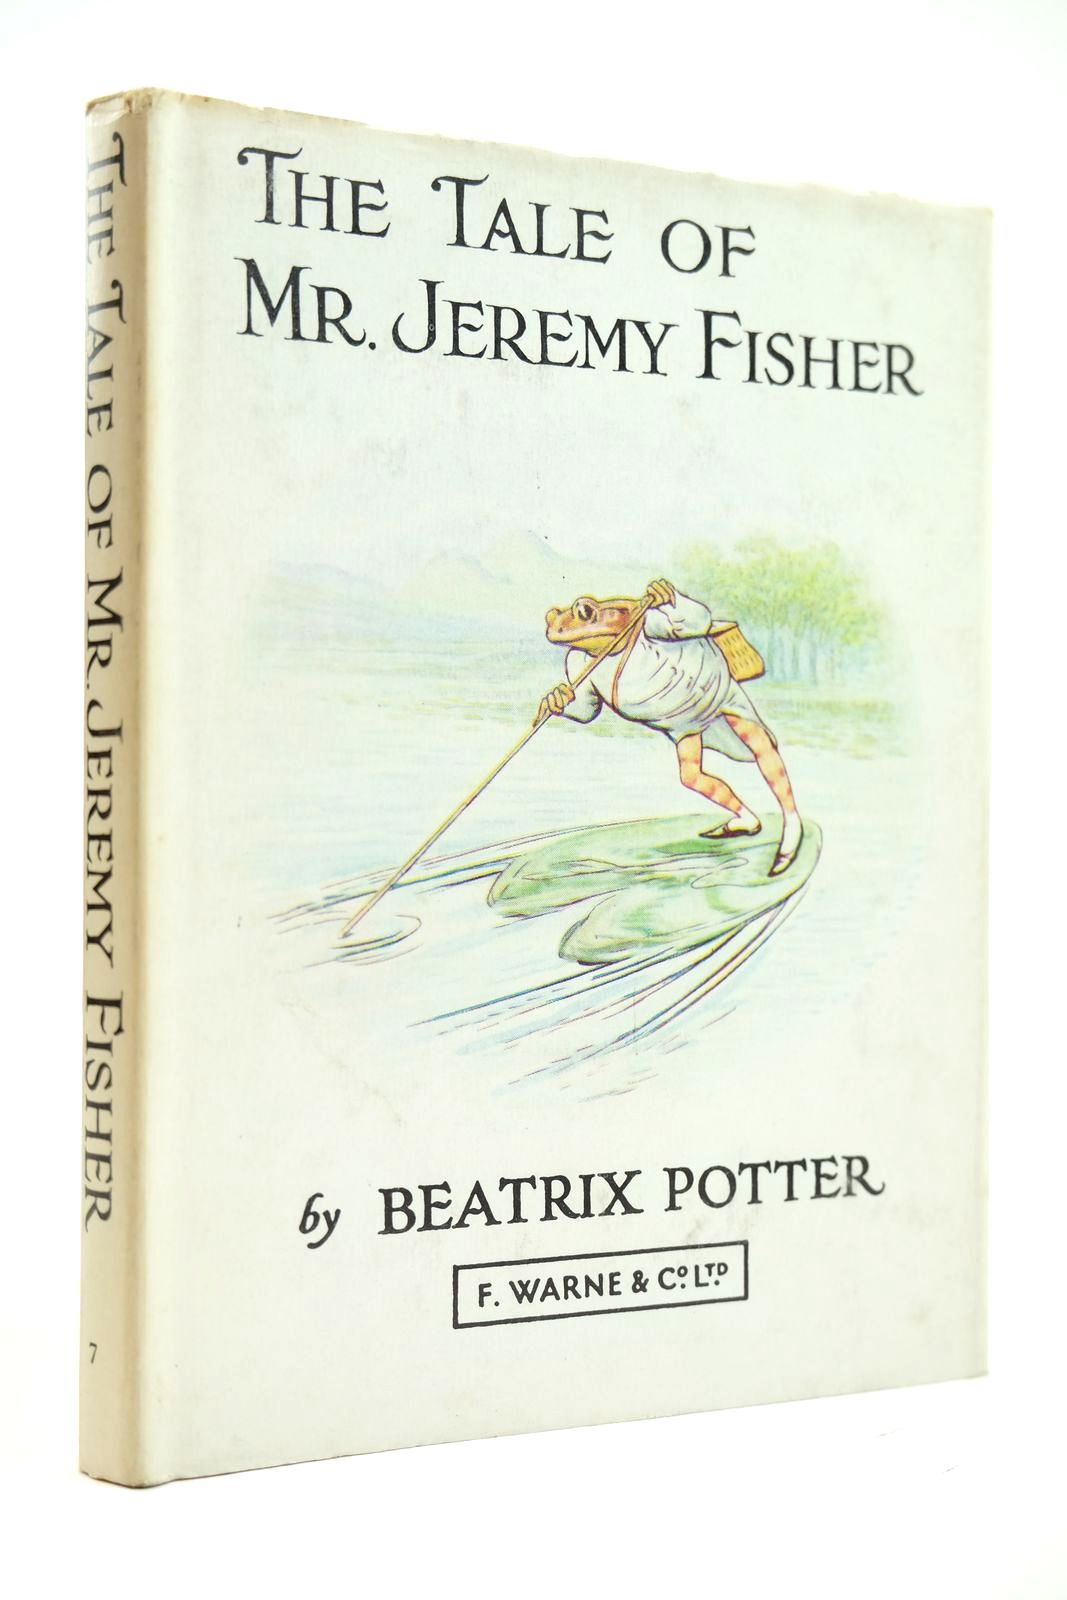 Photo of THE TALE OF MR. JEREMY FISHER written by Potter, Beatrix illustrated by Potter, Beatrix published by Frederick Warne &amp; Co Ltd. (STOCK CODE: 2131896)  for sale by Stella & Rose's Books